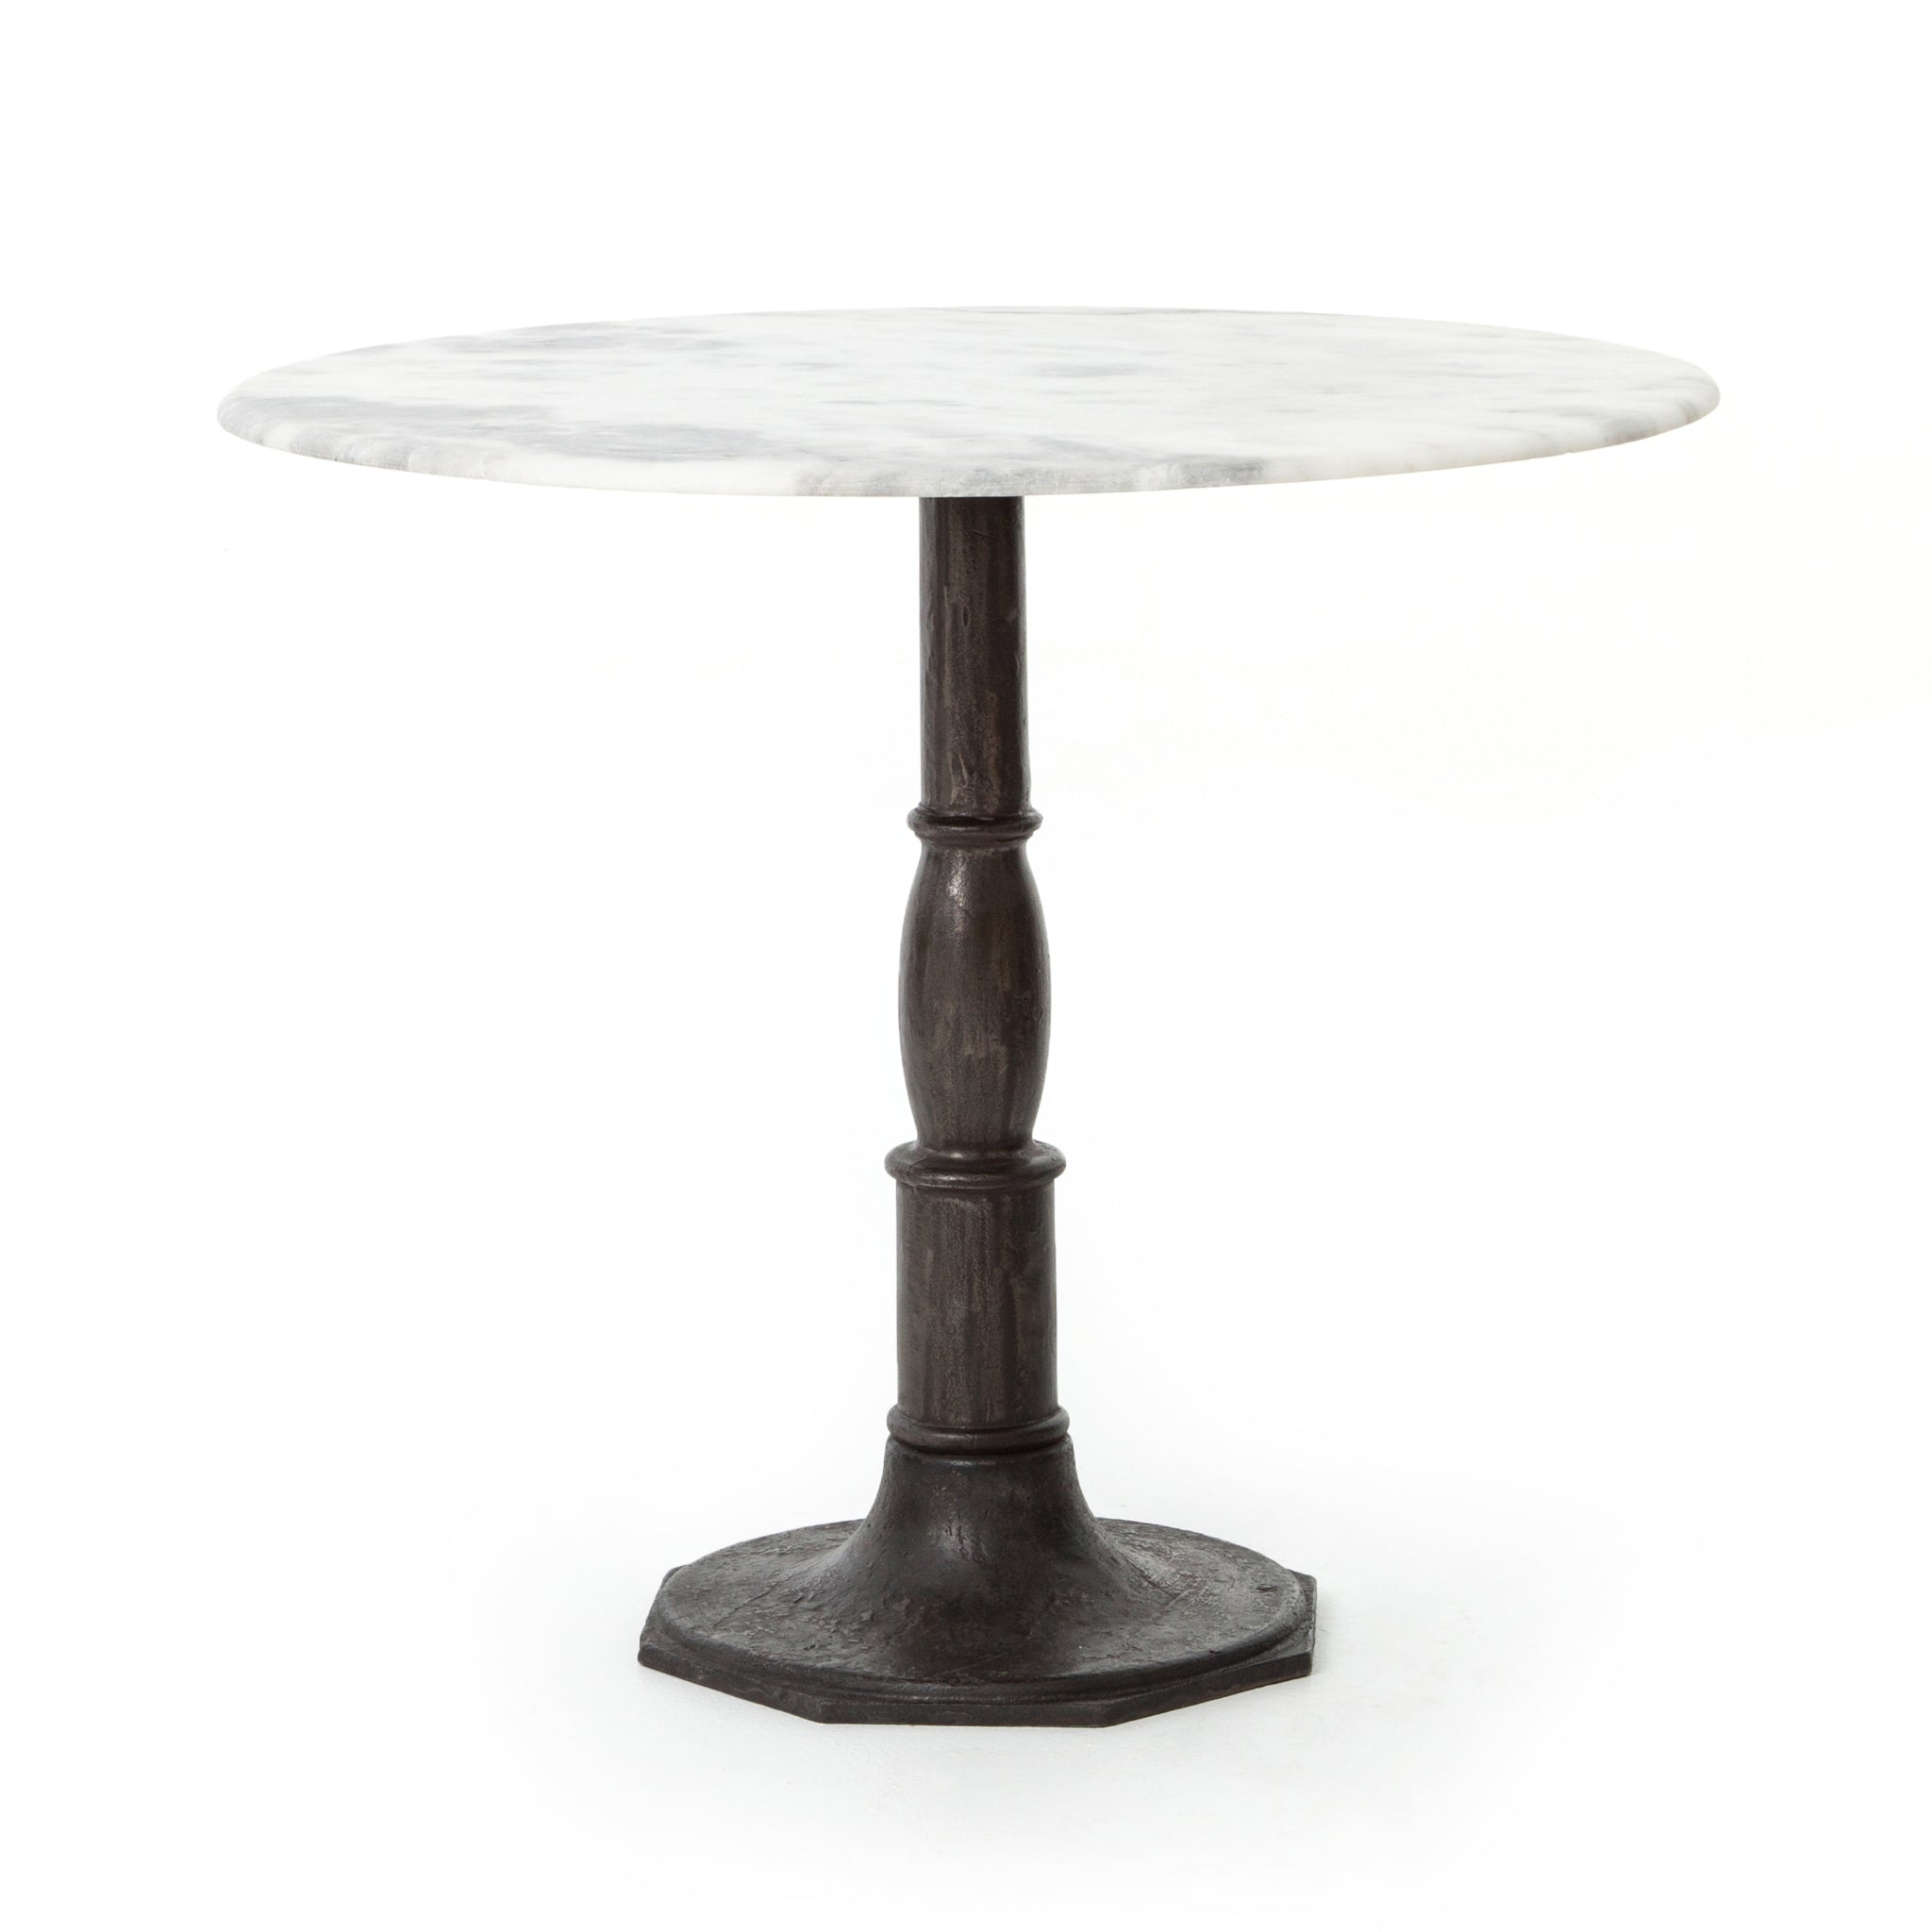 French-industrial meets bistro table. Detailed, 8-sided cast iron pedestal supports a dramatic white marble top with bull-nosed edge.  Overall Size: 36.00"w x 36.00"d x 31.00"h